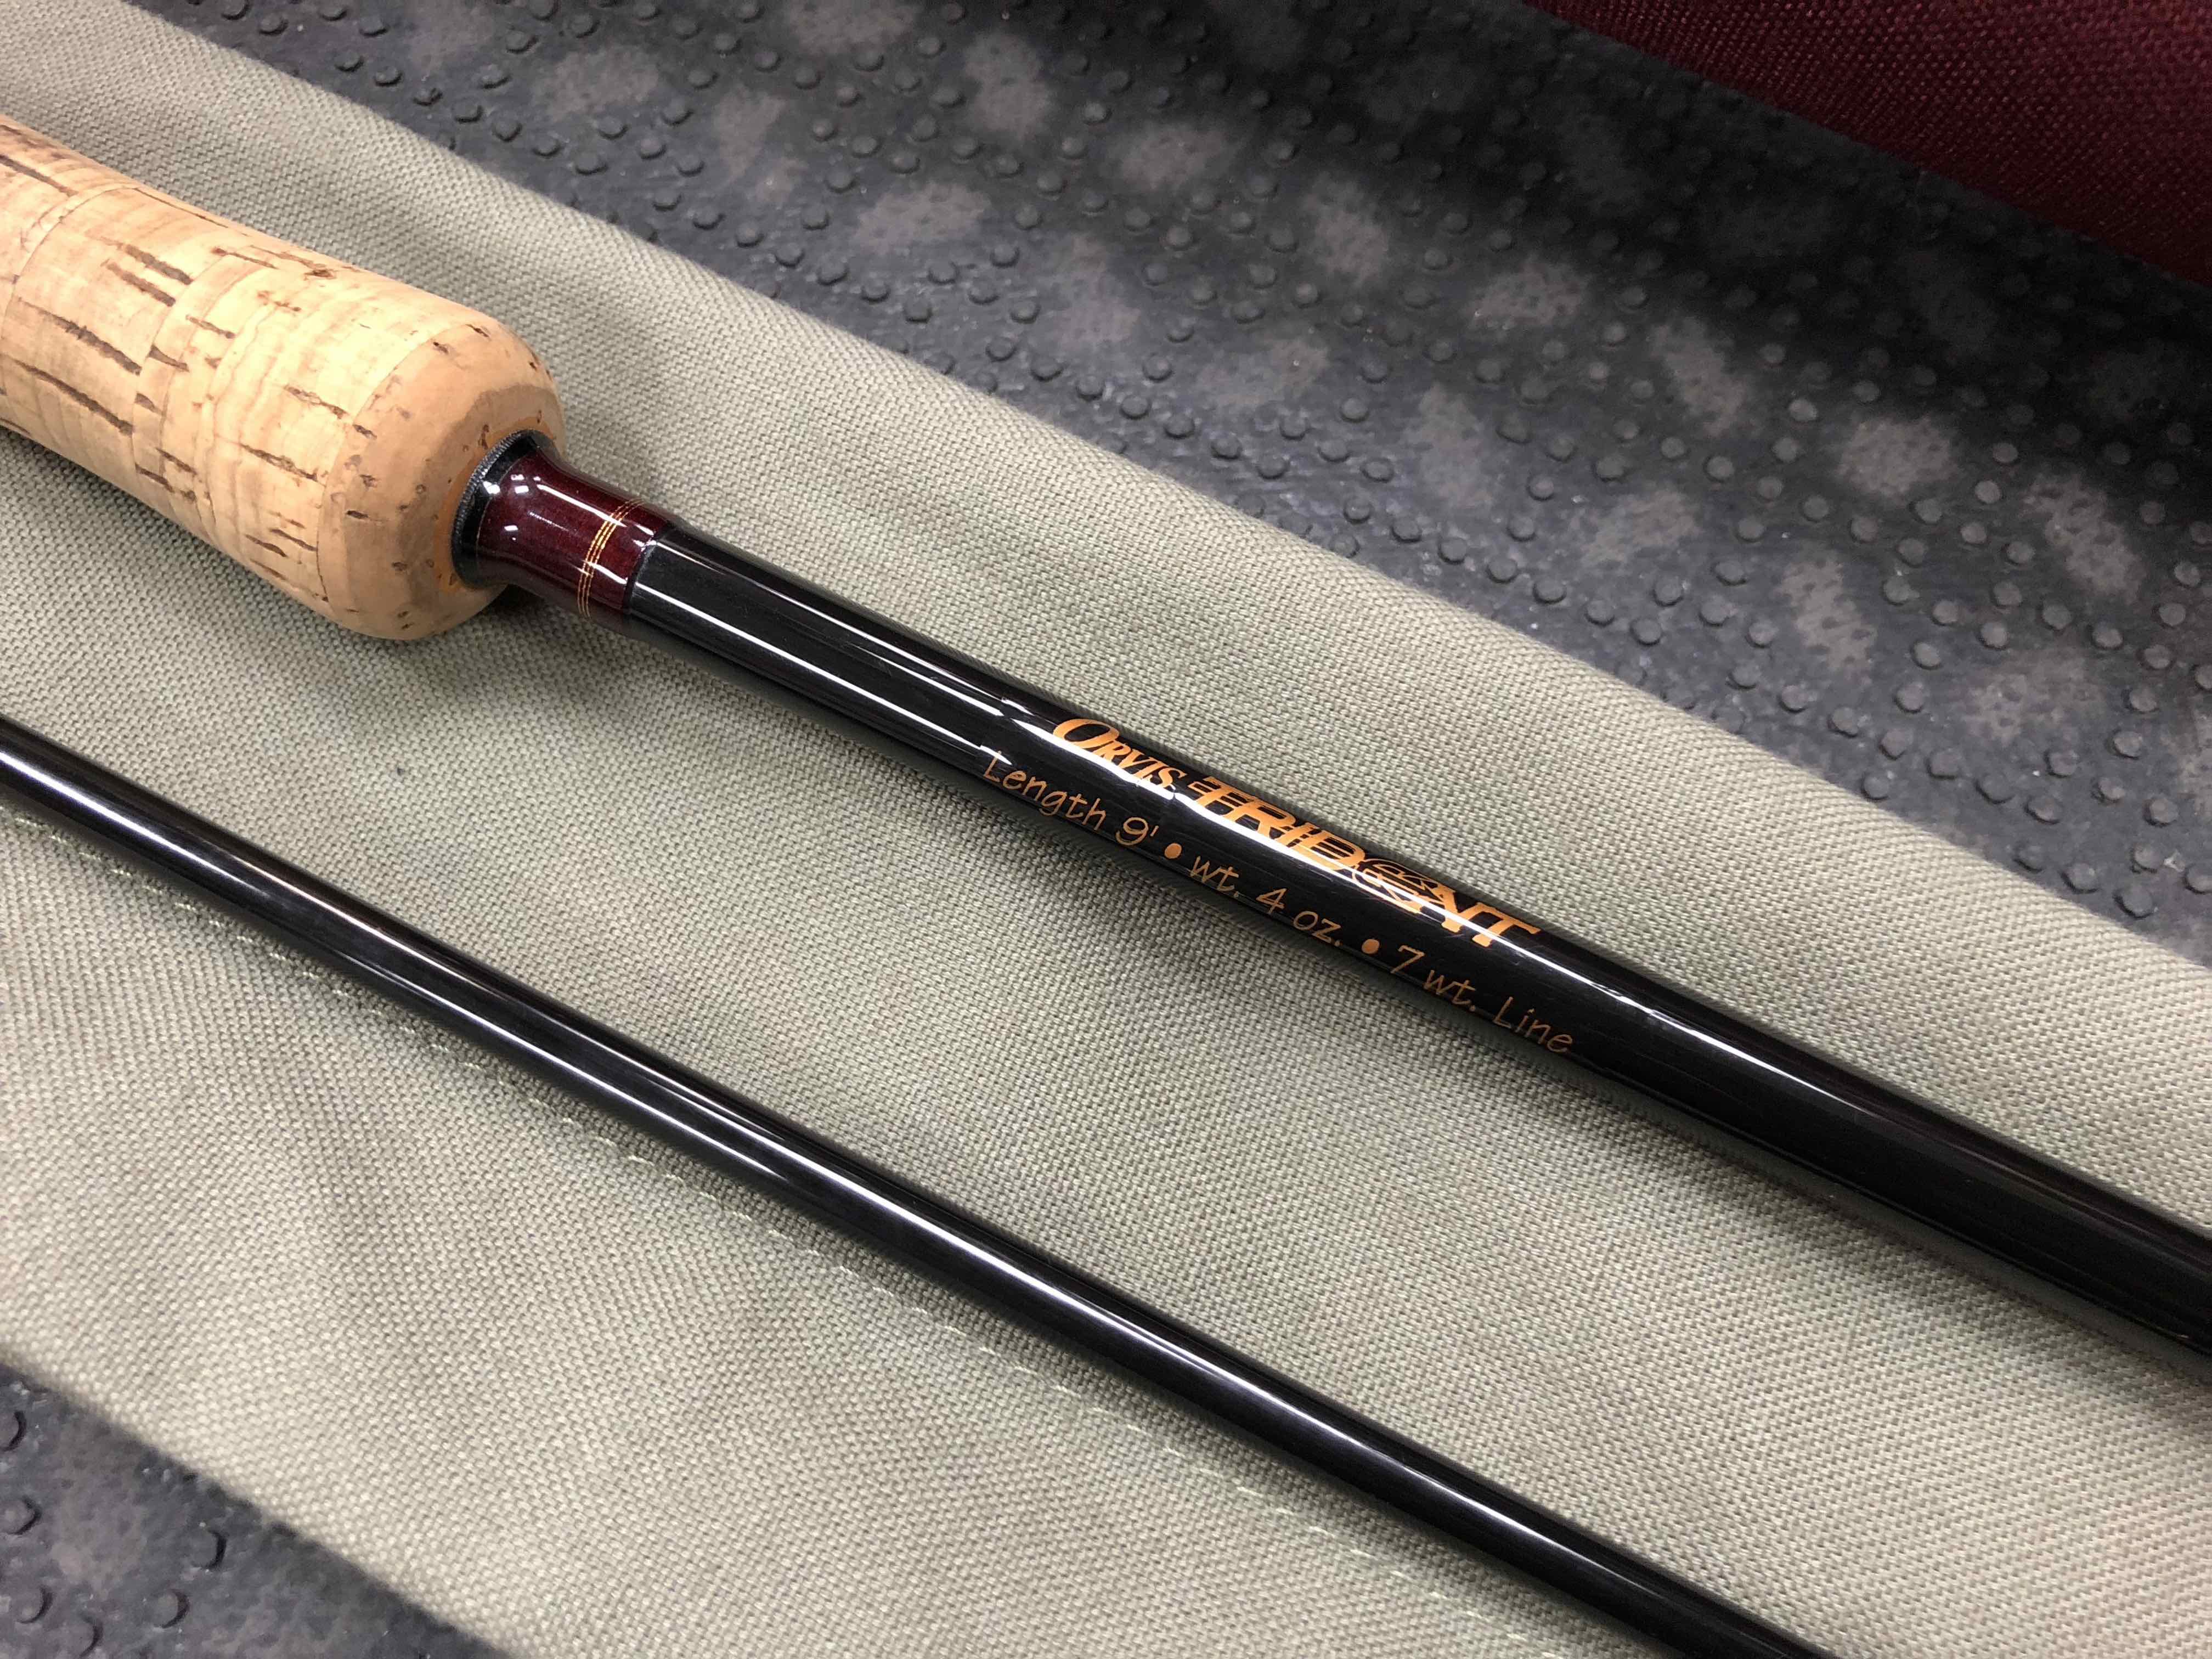 Orvis Trident 2pc Fly Rod - 9' 7wt Mid Flex 7.5 c/w Tube & Sock - EXCELLENT CONDITION! - $450